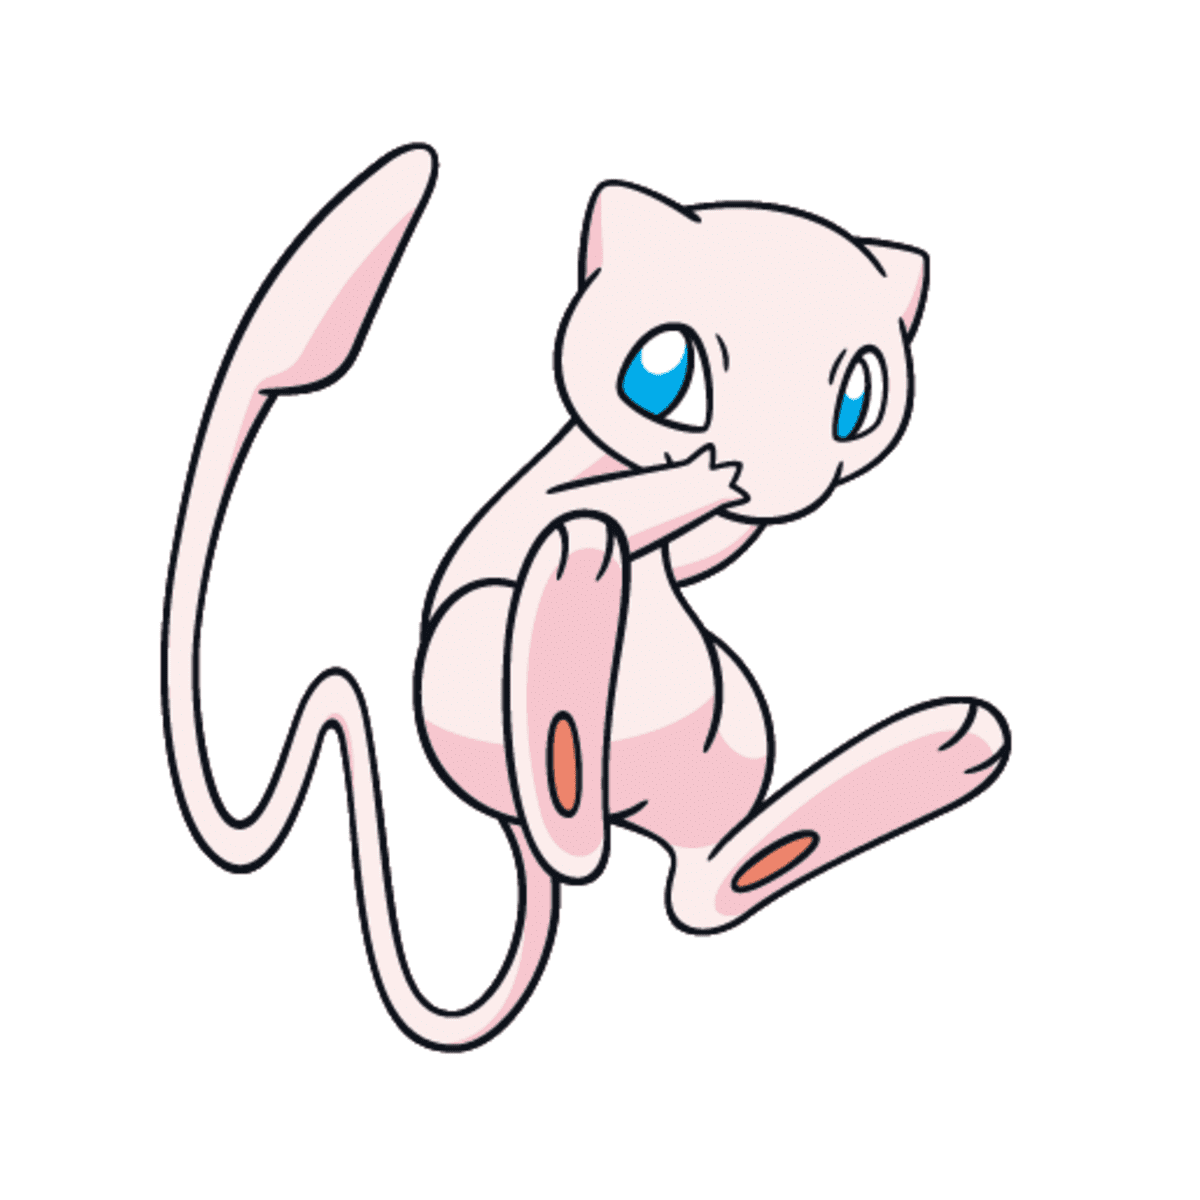 You can now catch Mew in Pokémon Go, hints Niantic - Android Authority